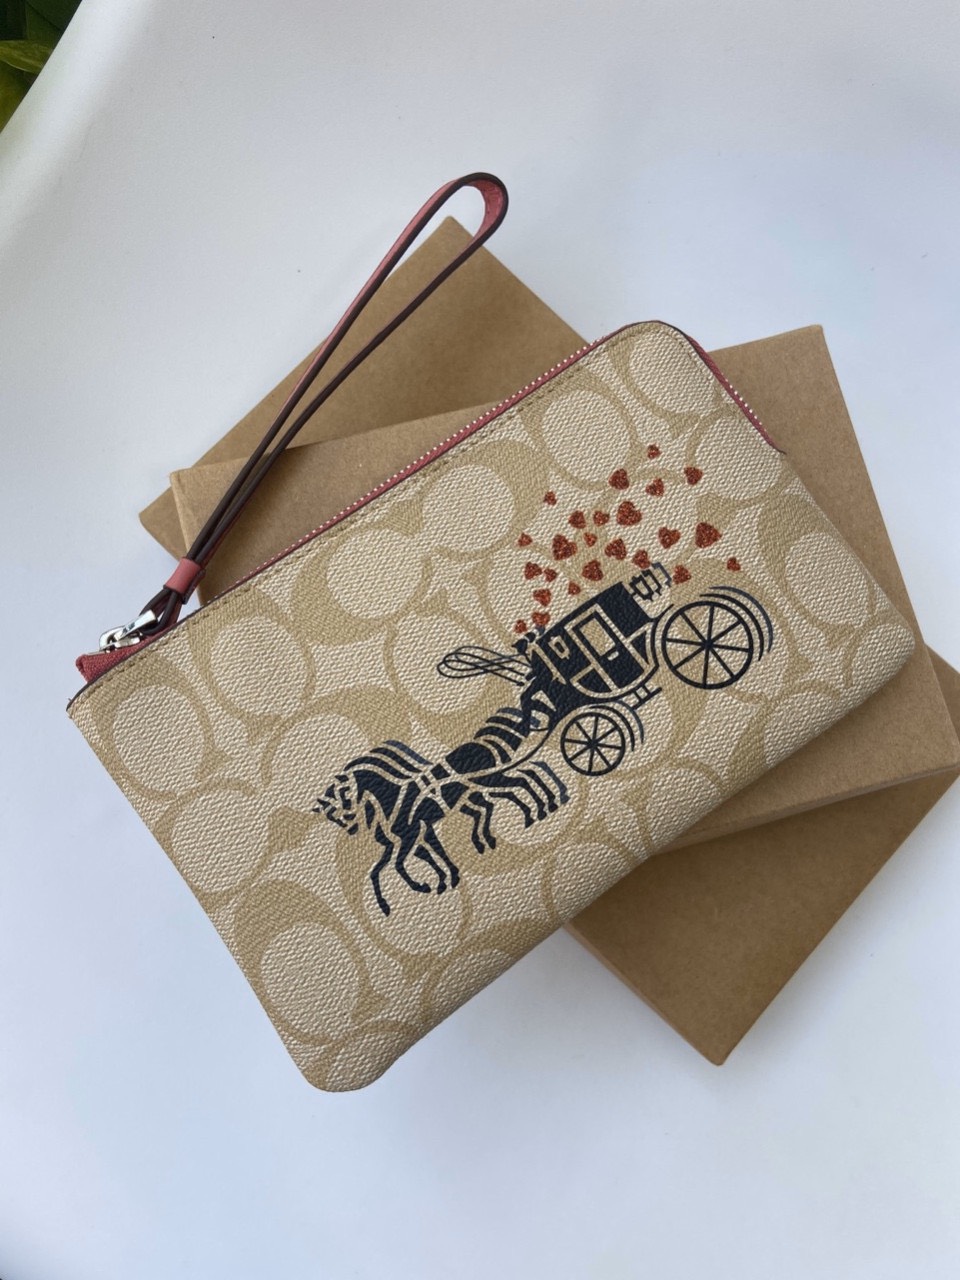 VÍ COACH MỎNG HỌA TIẾT XE NGỰA | CLUTCH COACH CORNER ZIP WRISTLET IN SIGNATURE CANVAS WITH HORSE AND CARRIAGE HEARTS 23